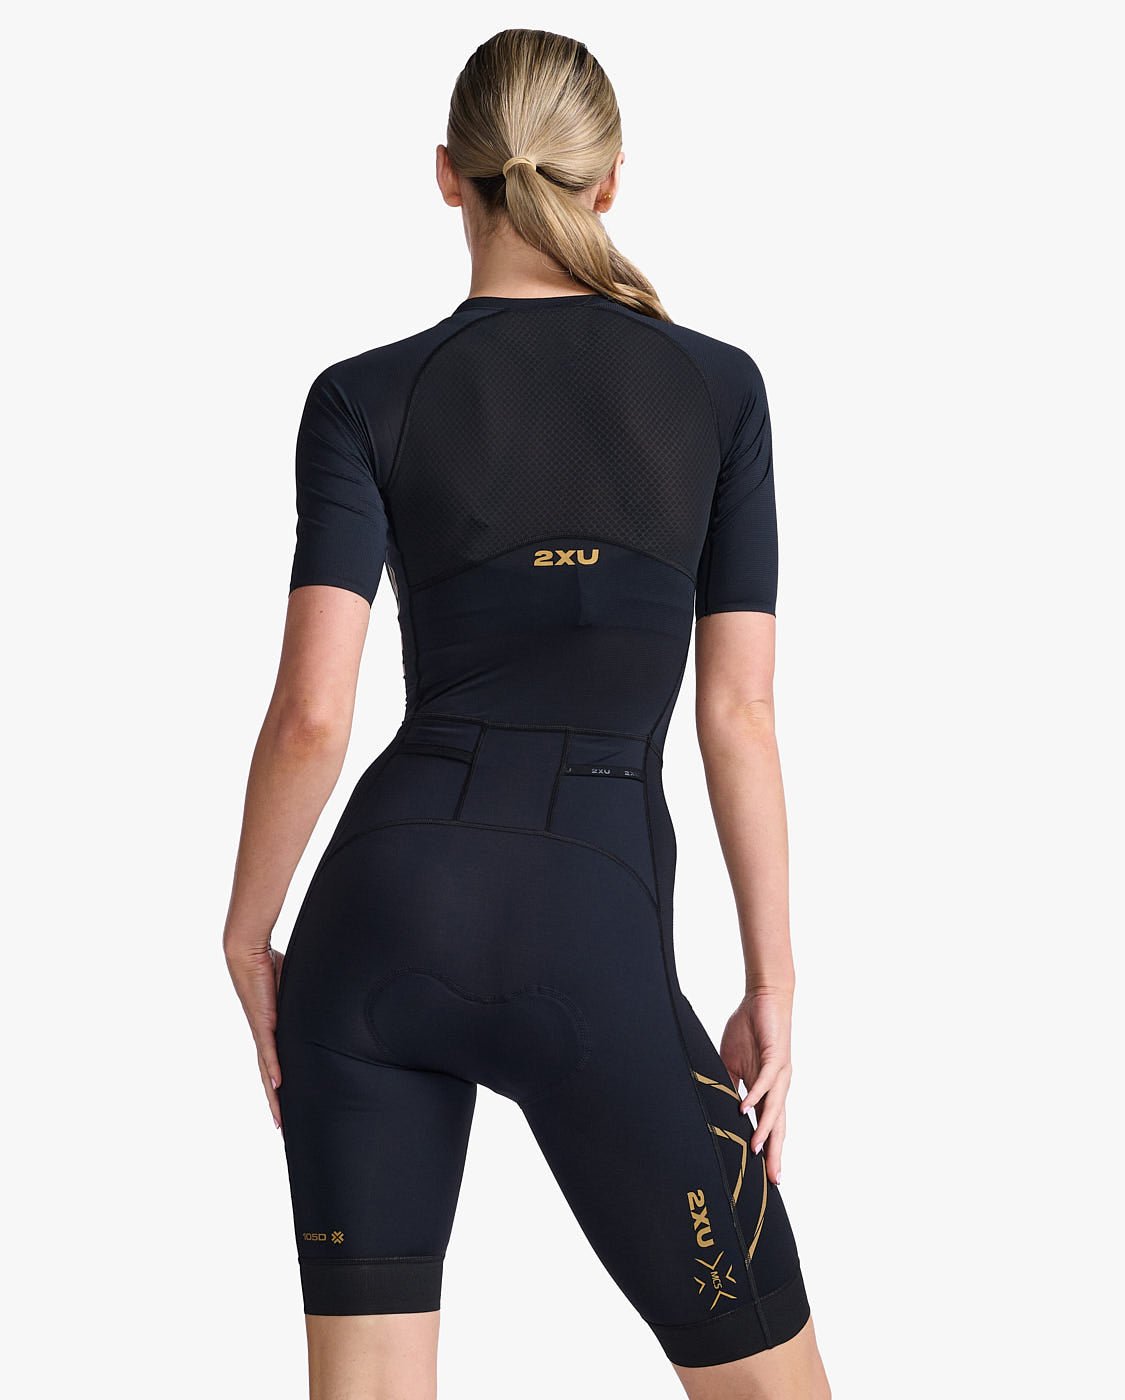 2XU South Africa - Womens Light Speed Sleeved Trisuit - Black/Gold